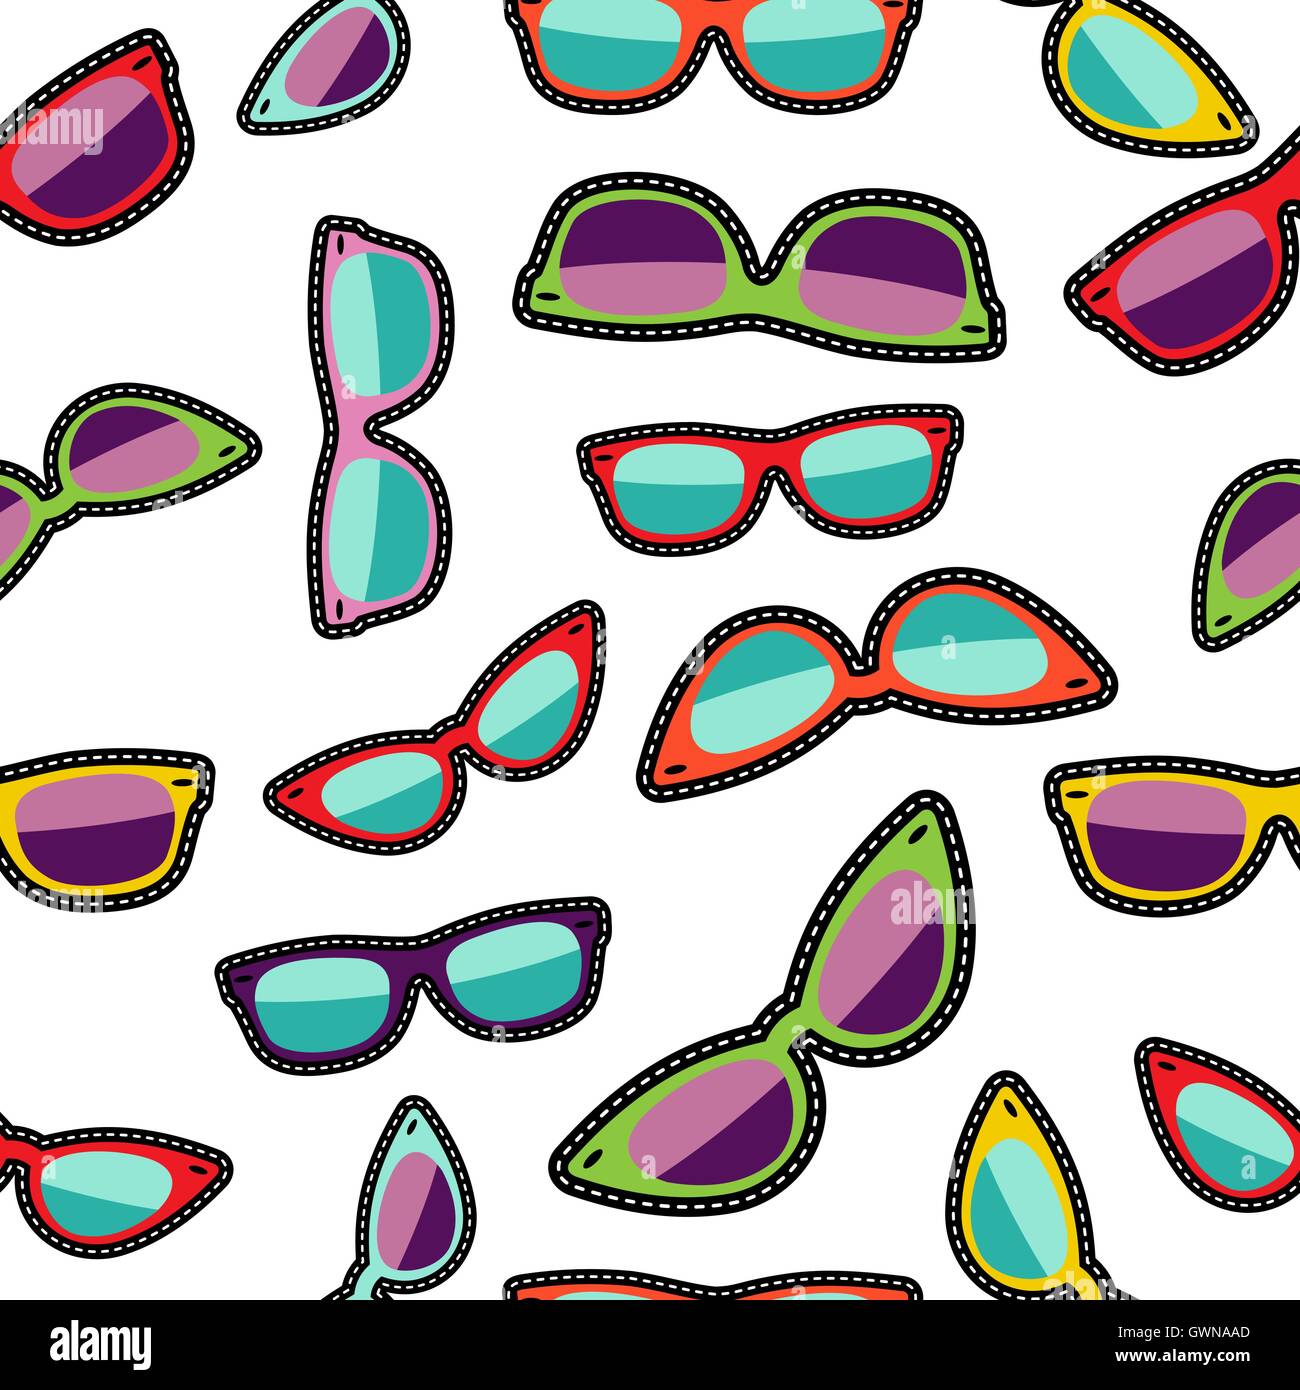 Hipster sunglasses cartoon designs, seamless pattern with colorful eye glass elements. EPS10 vector. Stock Vector